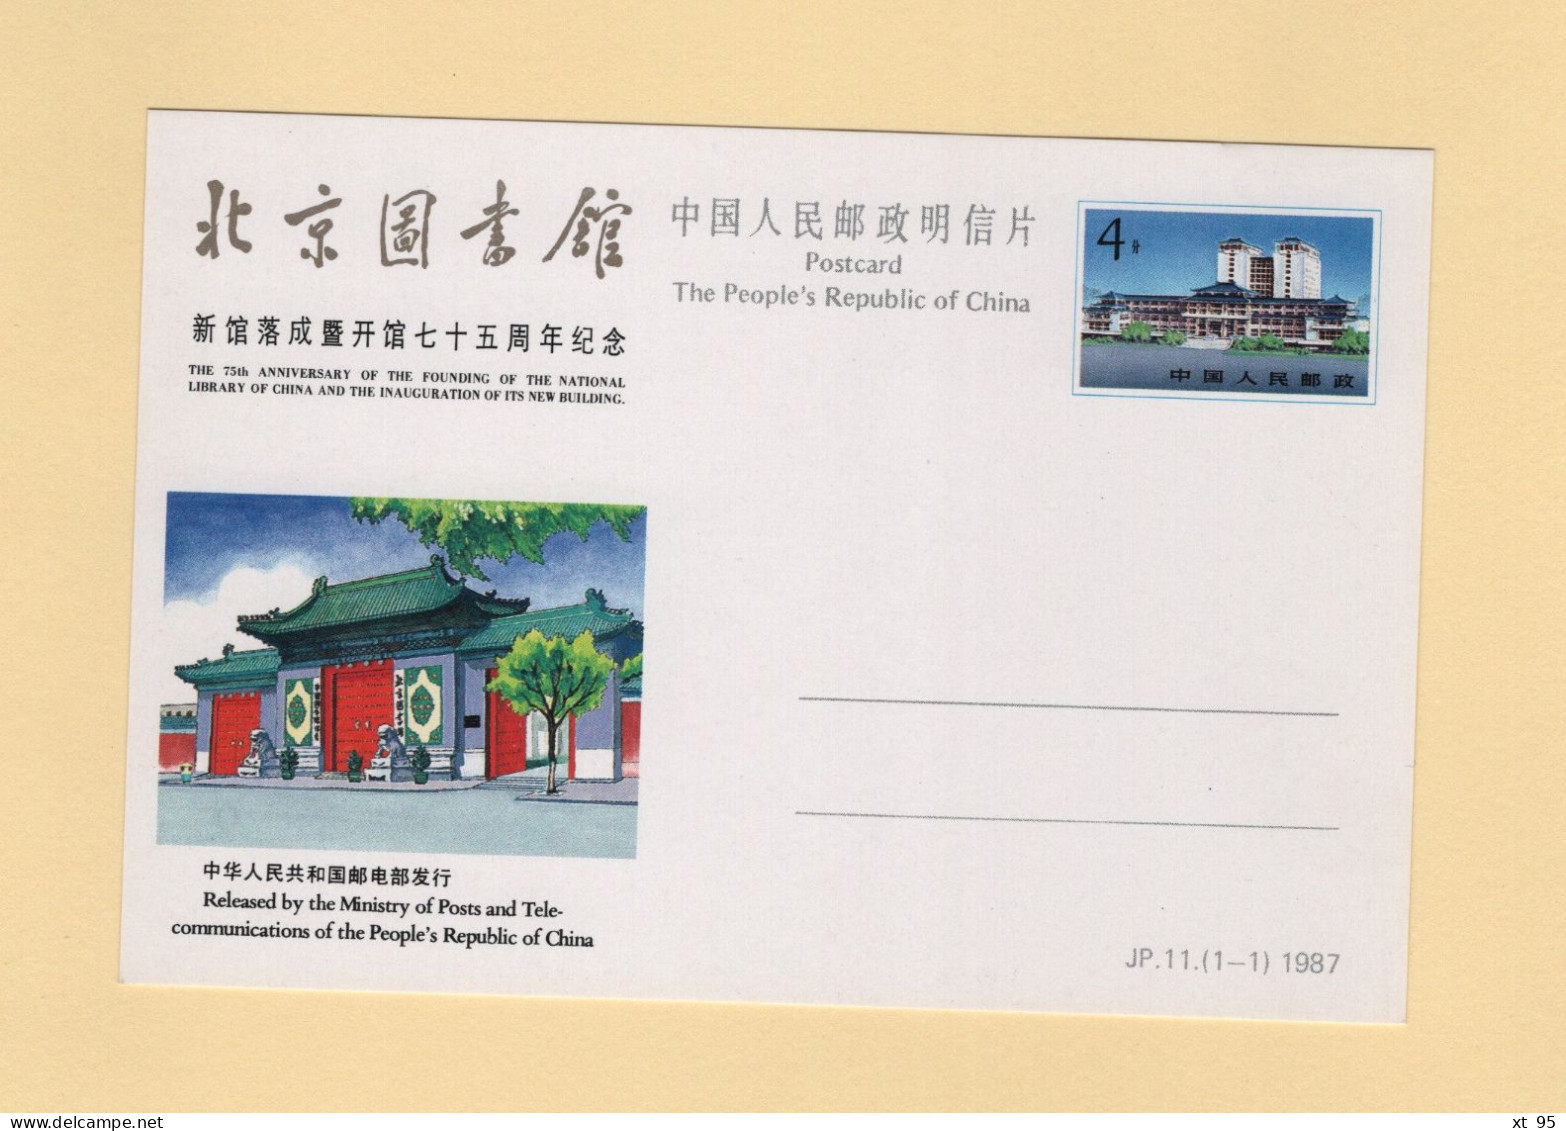 Chine - JP11 - The 75th Anniversary Of The Founding Of The National Library Of China - Cartoline Postali